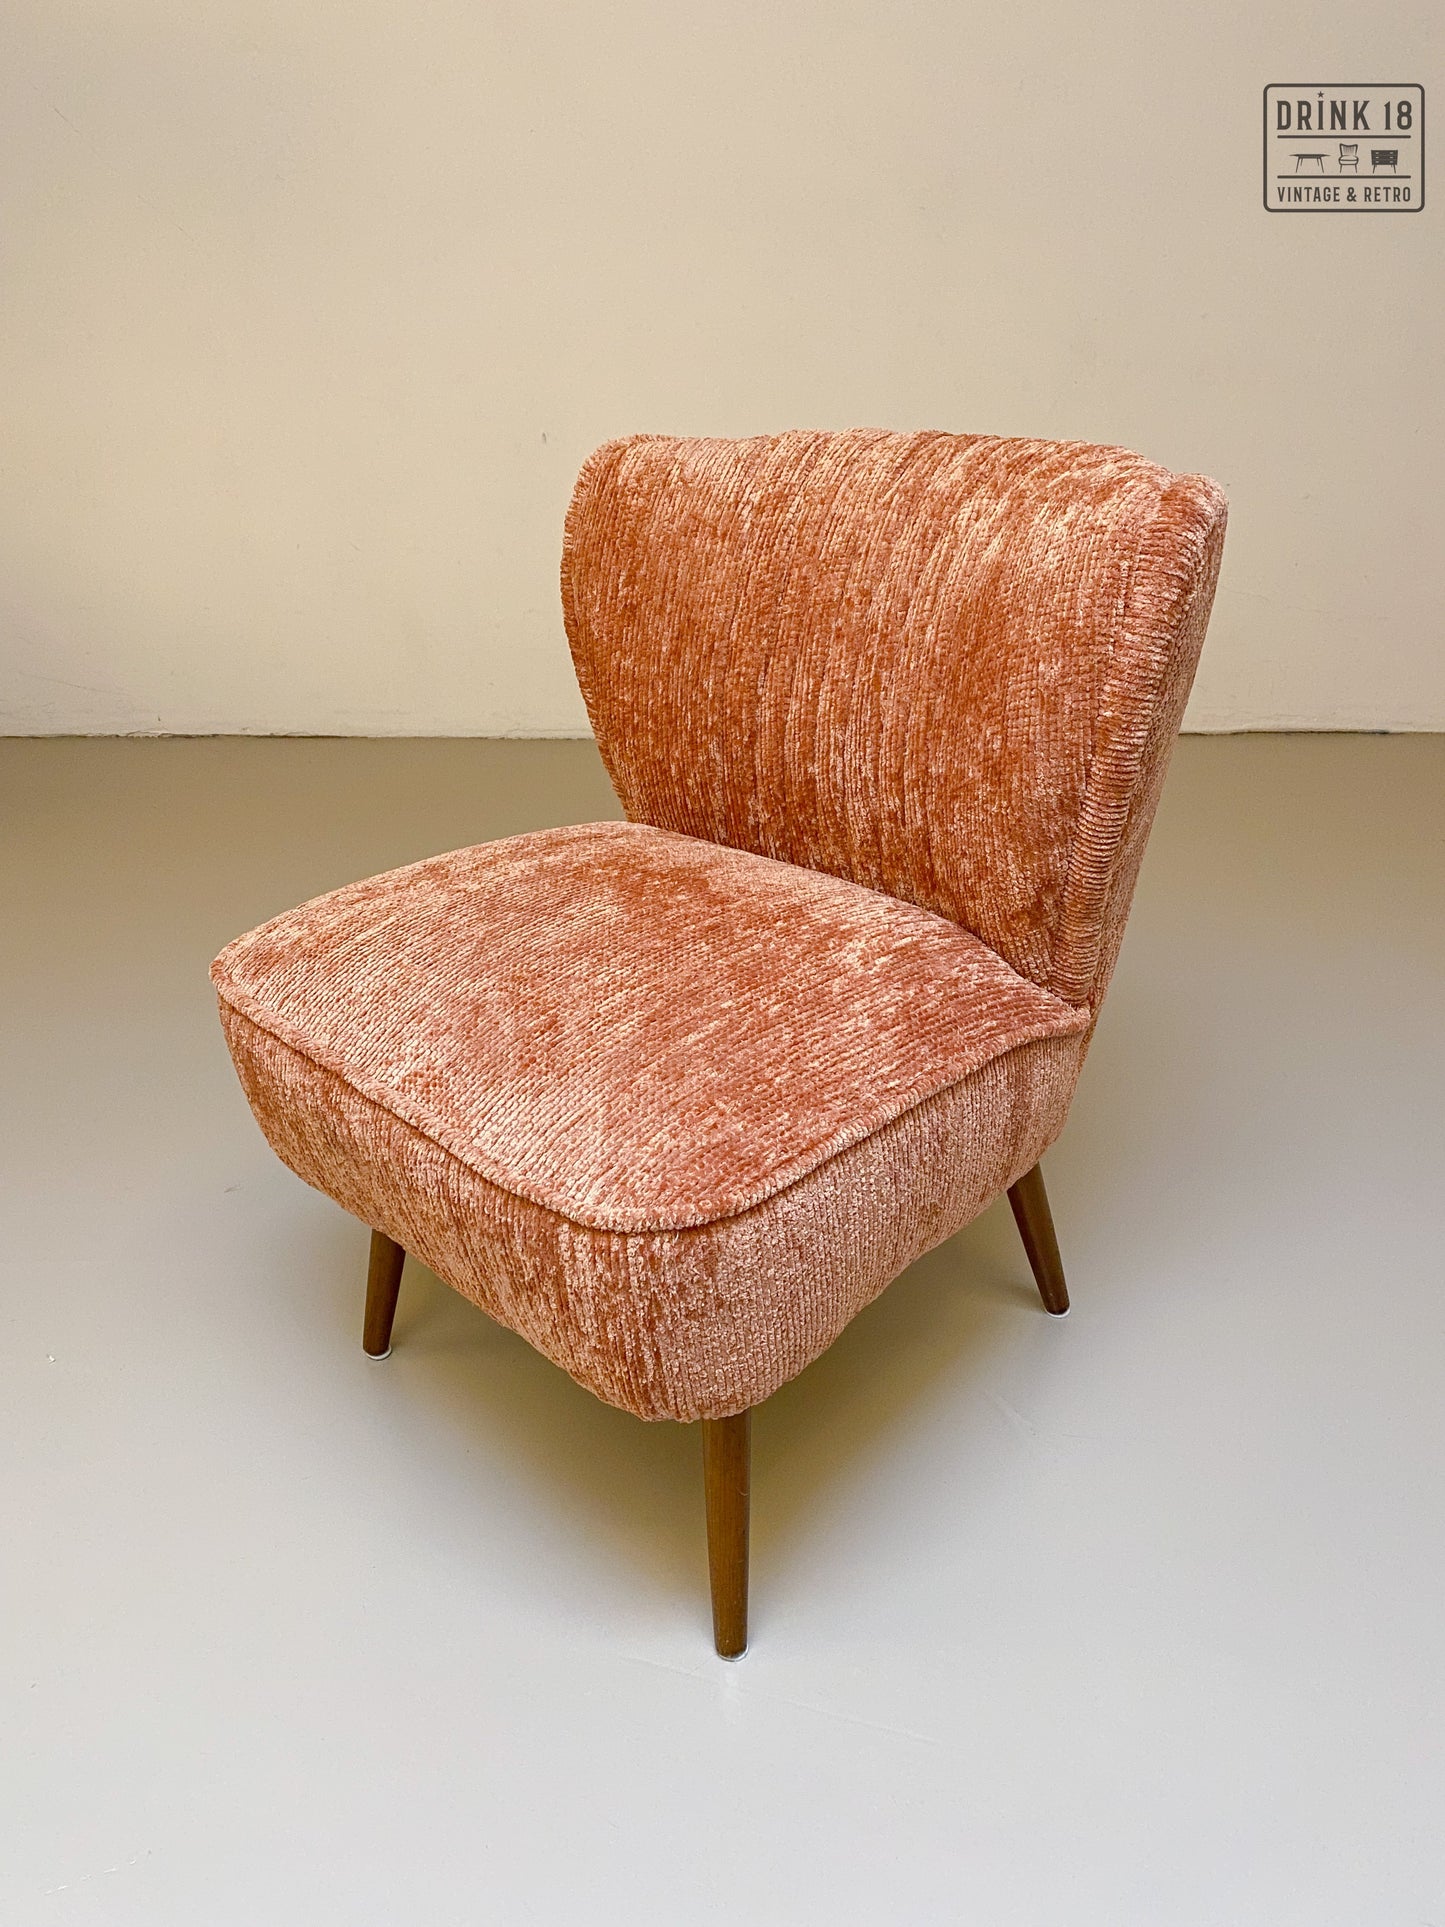 Vintage - Expo 58 / Cocktail chair #2